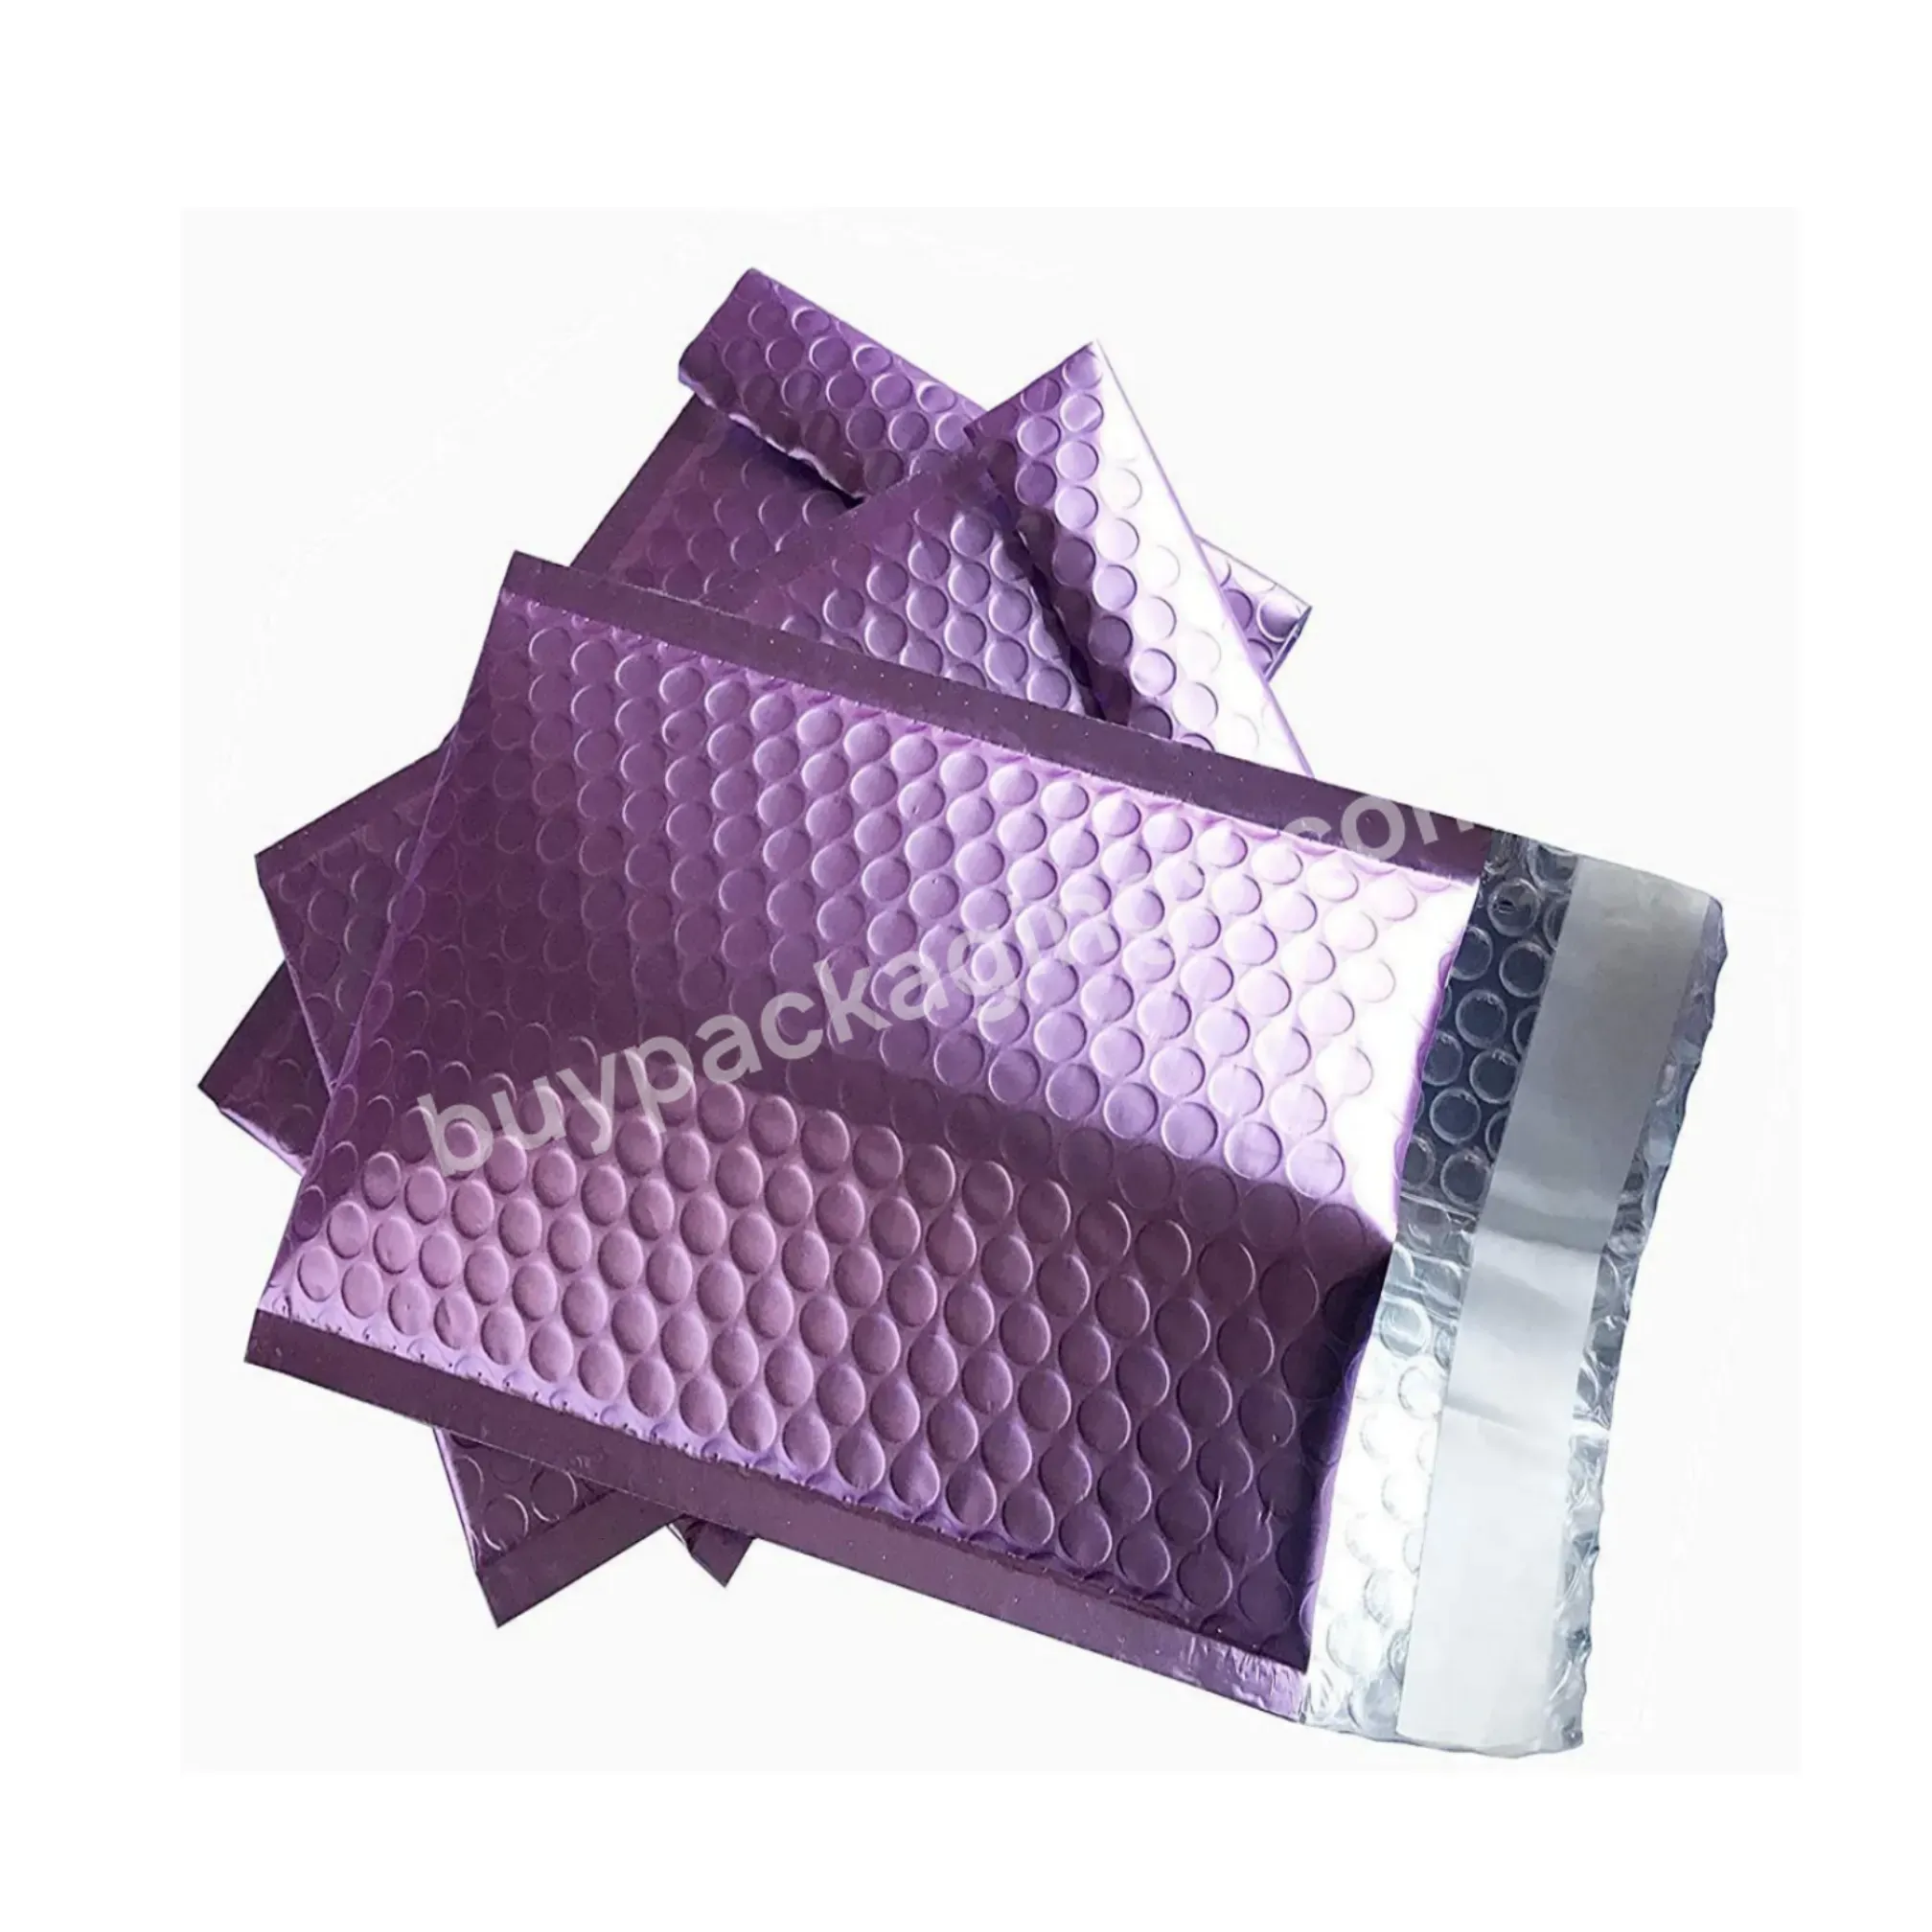 Ctcx Purple Plymor Mail Bubble Metallic Bubble Mailer Bag Shipping Plastic Bubble Padded Mailer Envelopes Holographic Packages